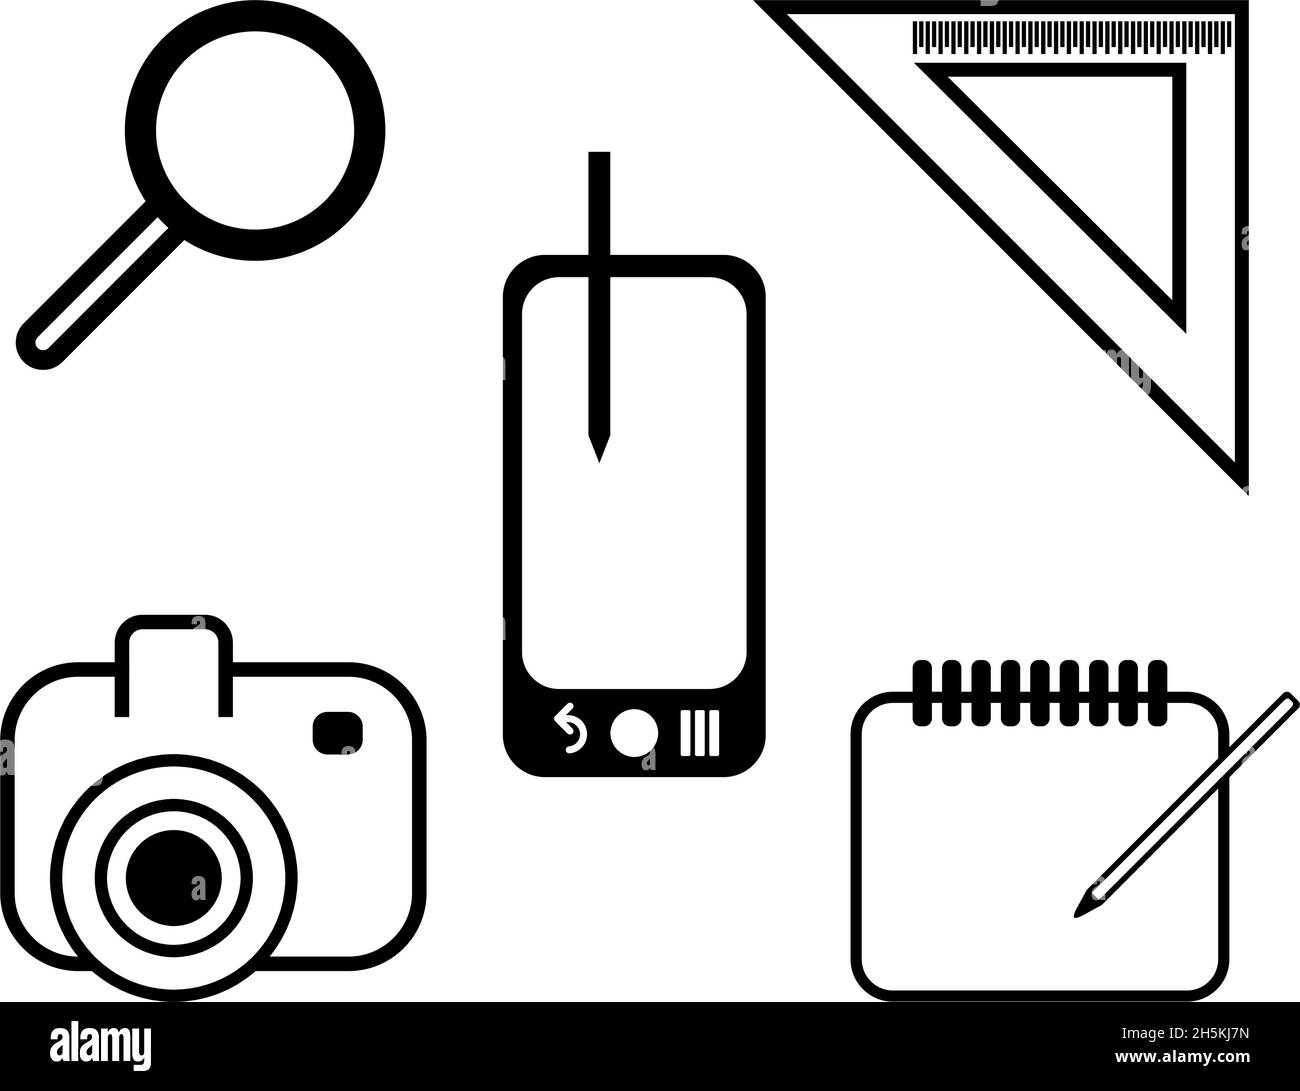 Simple Set Of Photographer Related Vector Outline Icons. Contains Icons like camera, ruler, magnifier, notebook and pen tablet Stock Vector